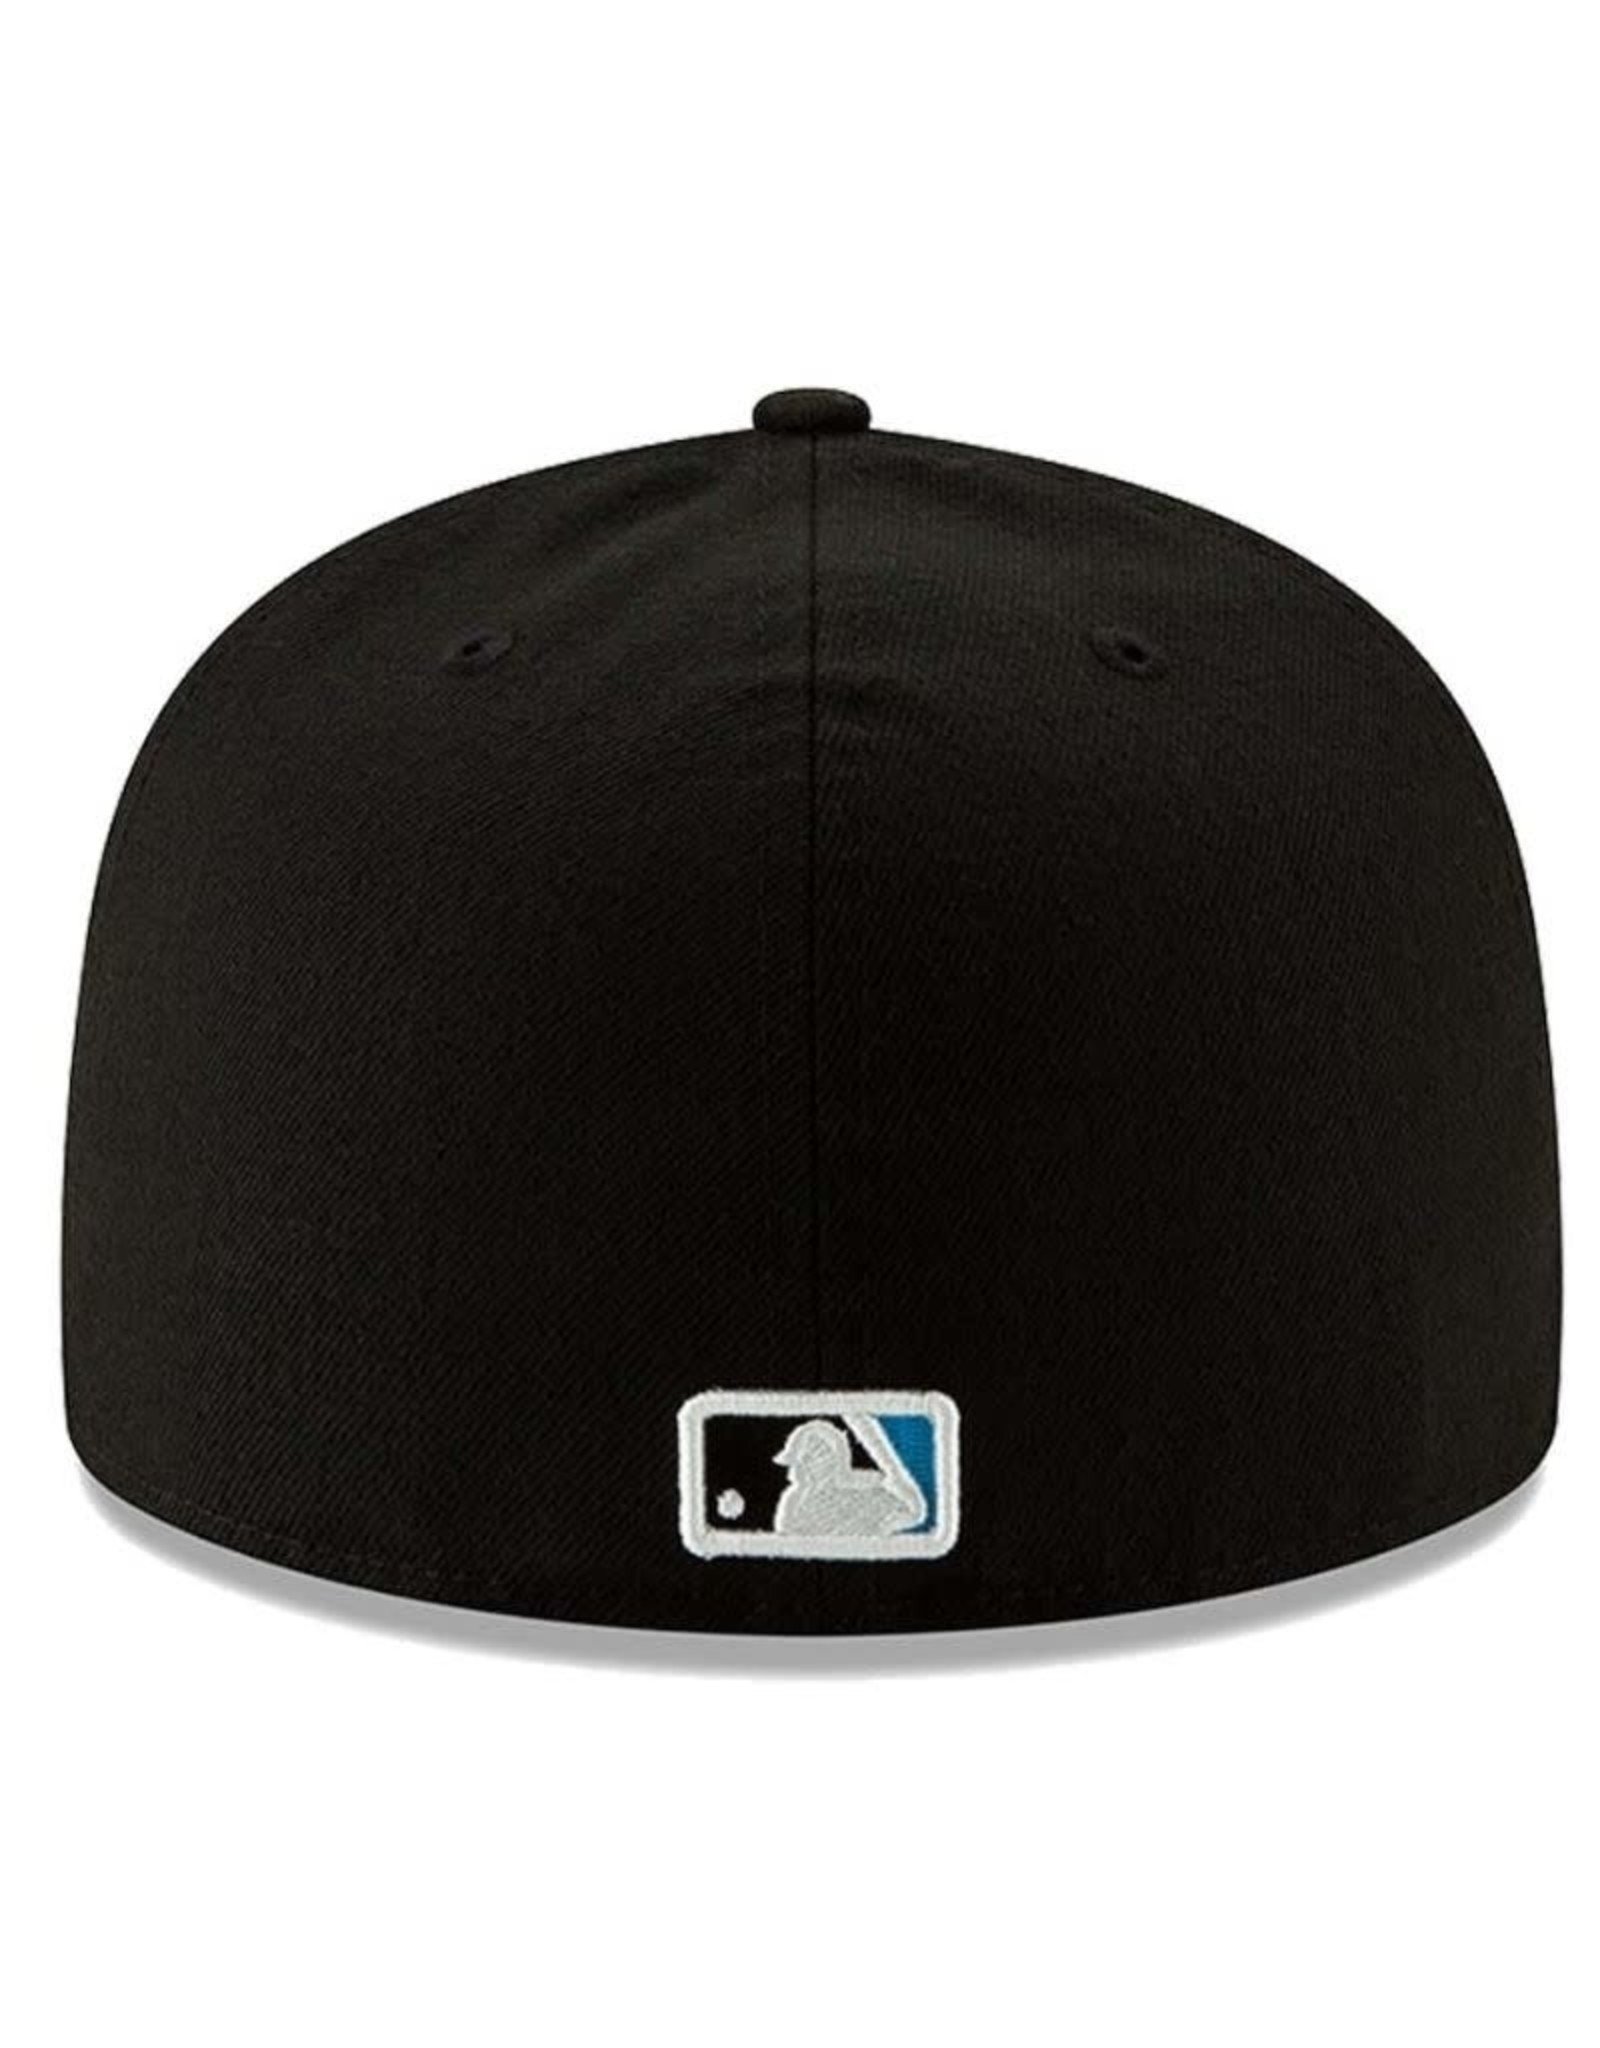 New Era On-Field  Authentic 59FIFTY Home Hat Miami Marlins Black